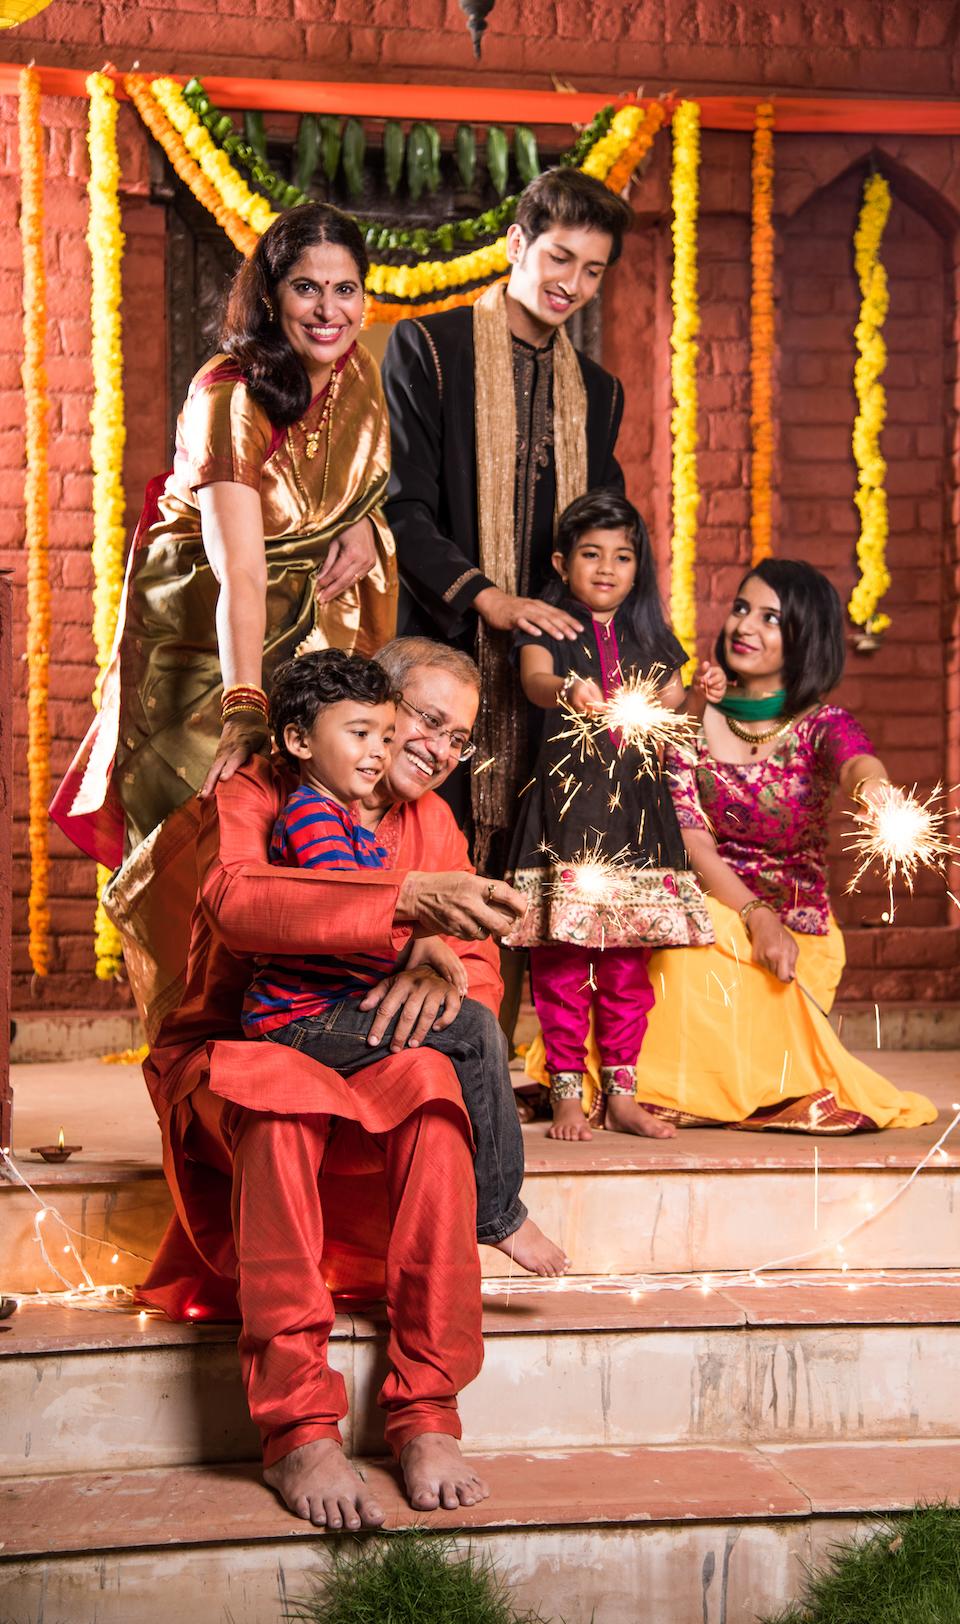 Celebrating Diwali with homestay family in India